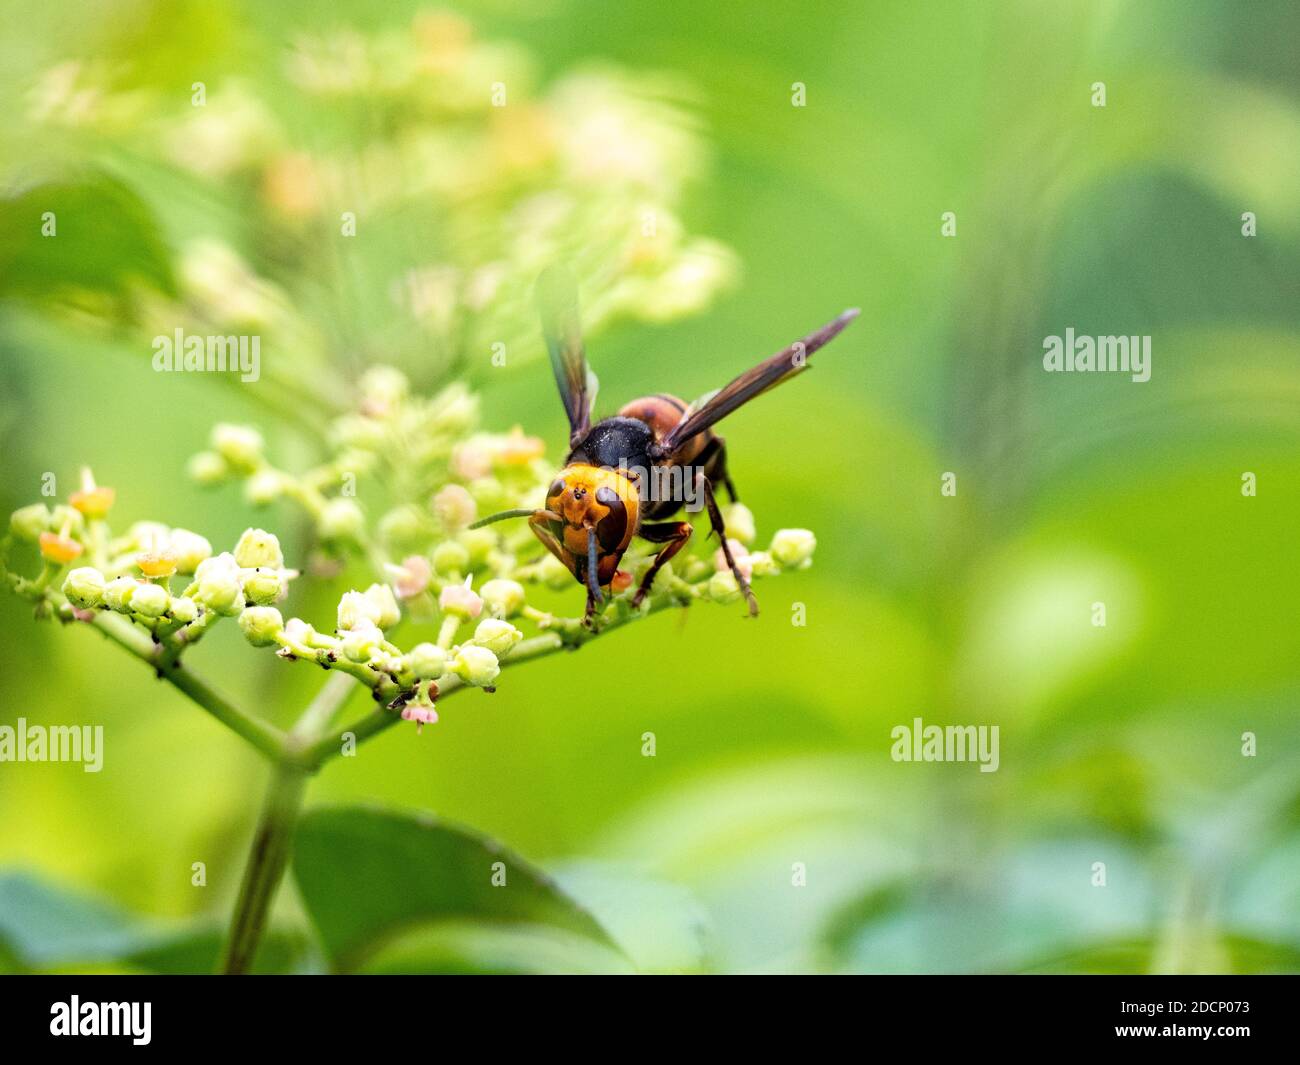 The Japanese variant of the asian giant hornet, Vespa mandarinia, also known as a murder hornet in the United States, rests on the small flowers of bu Stock Photo